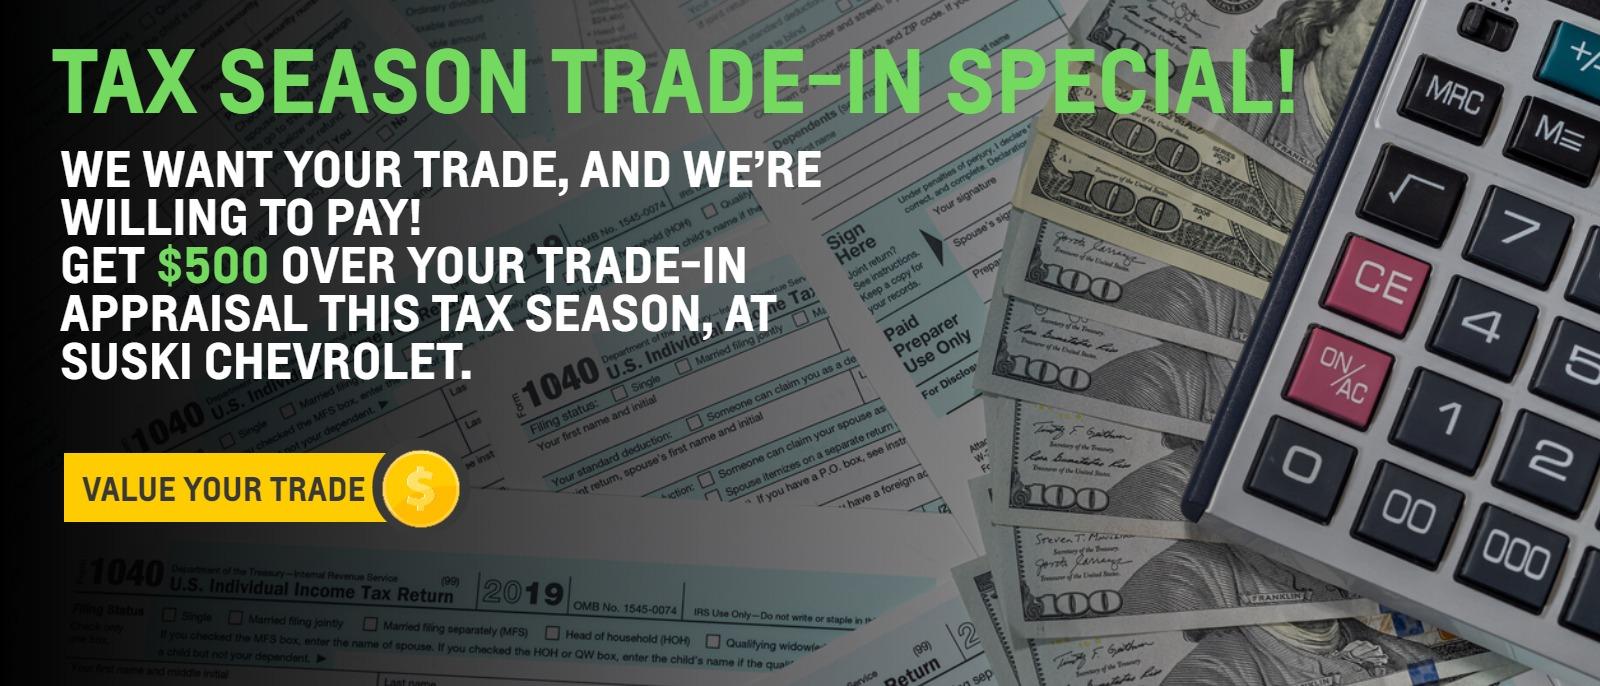 We want your trade, and we’re willing to pay!
Get $500 over your Trade-in appraisal this Tax Season, at Suski Chevrolet.